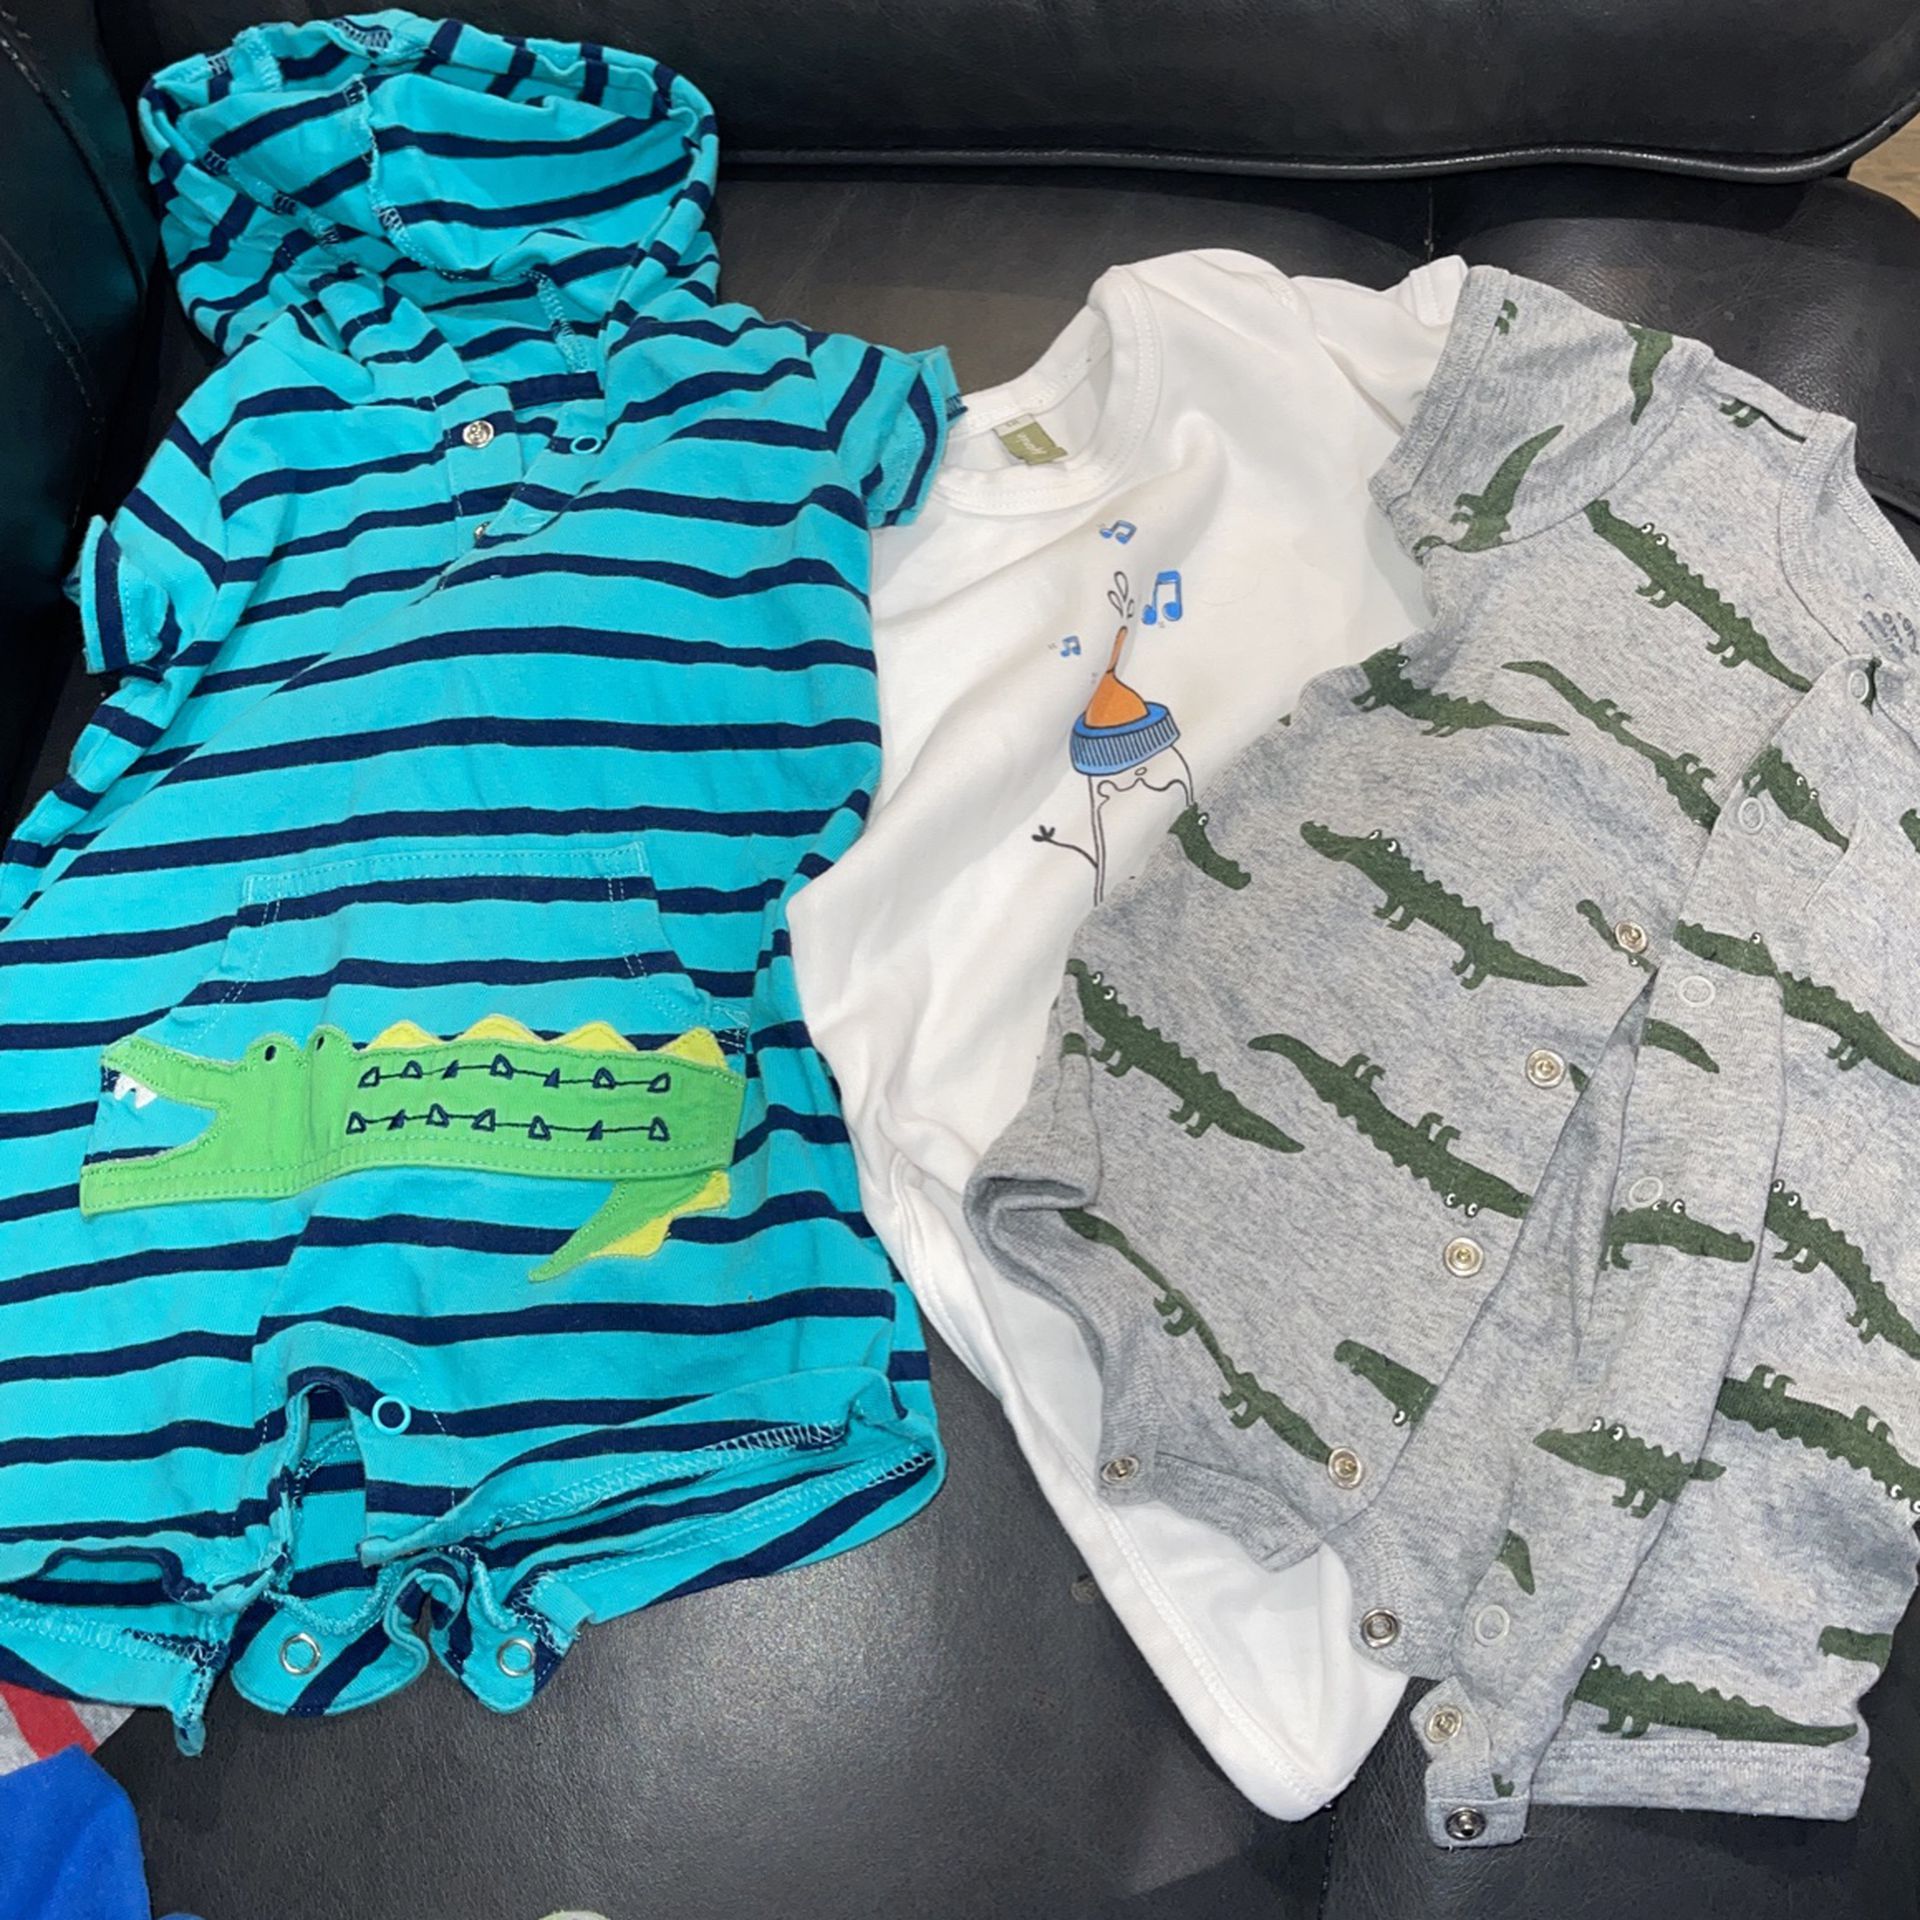 Onesies/Bodysuits - 6-9 Months $3 for All Clothes